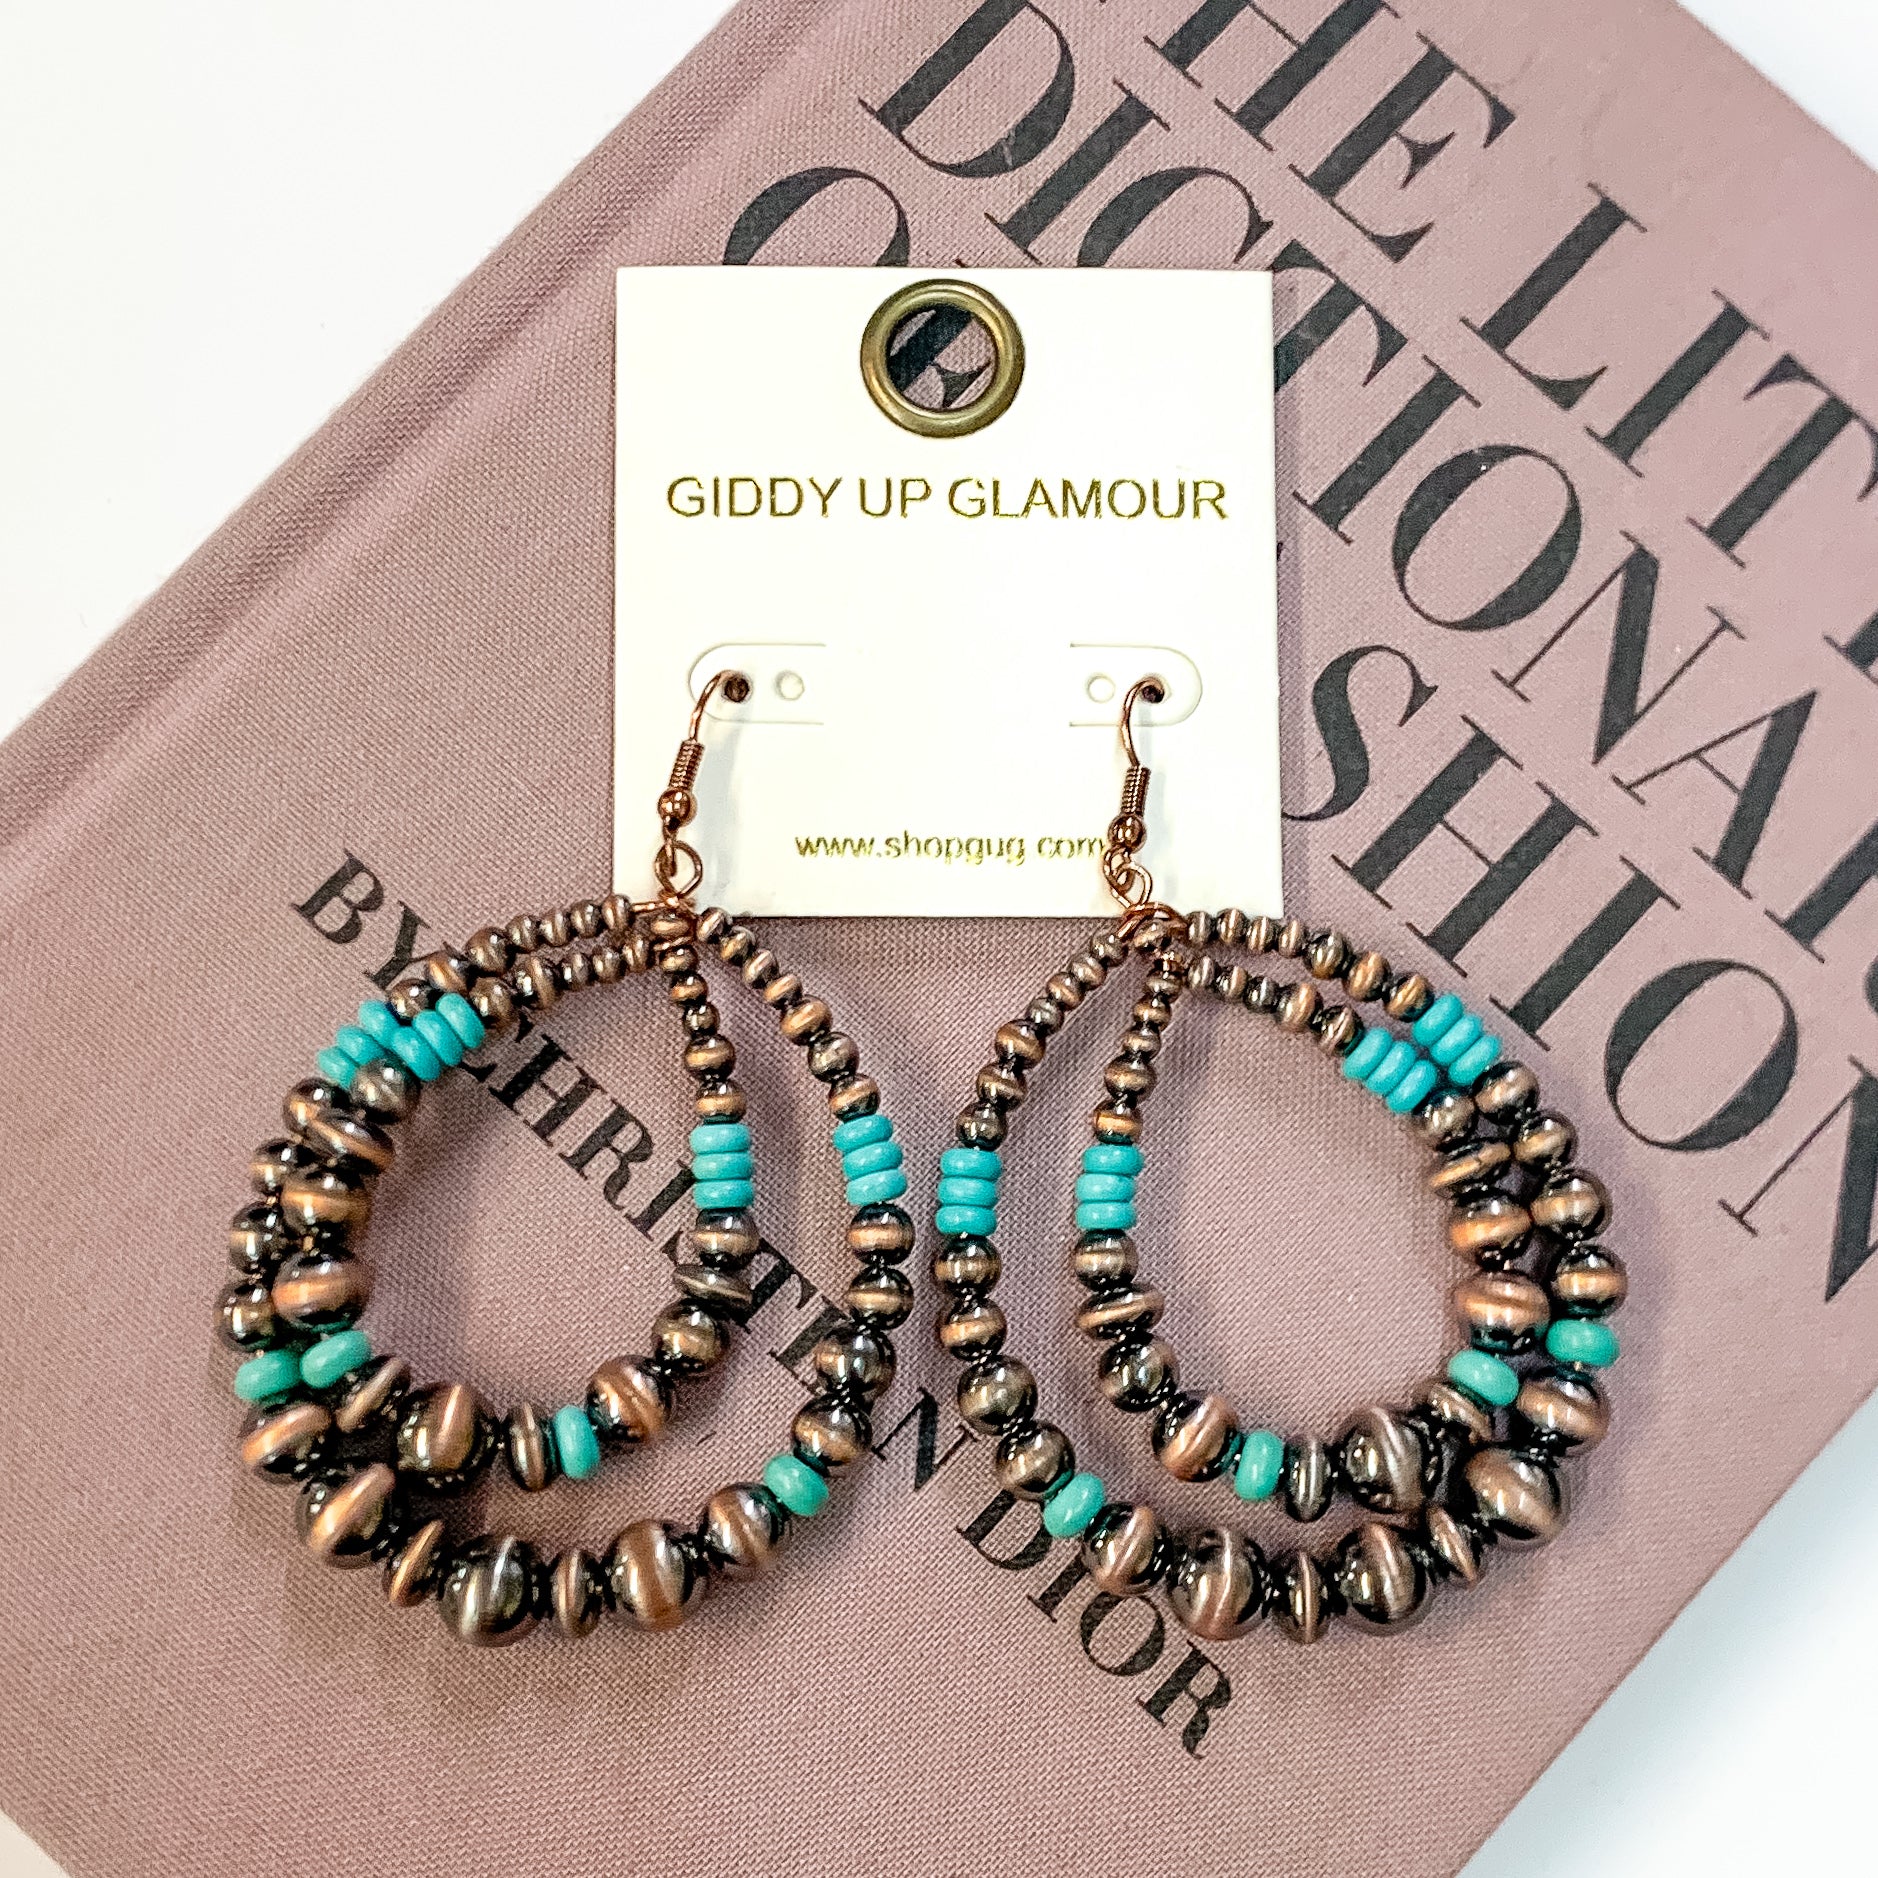 Beaded Teardrop Earrings with Turquoise Blue Spacers in Copper Tone - Giddy Up Glamour Boutique